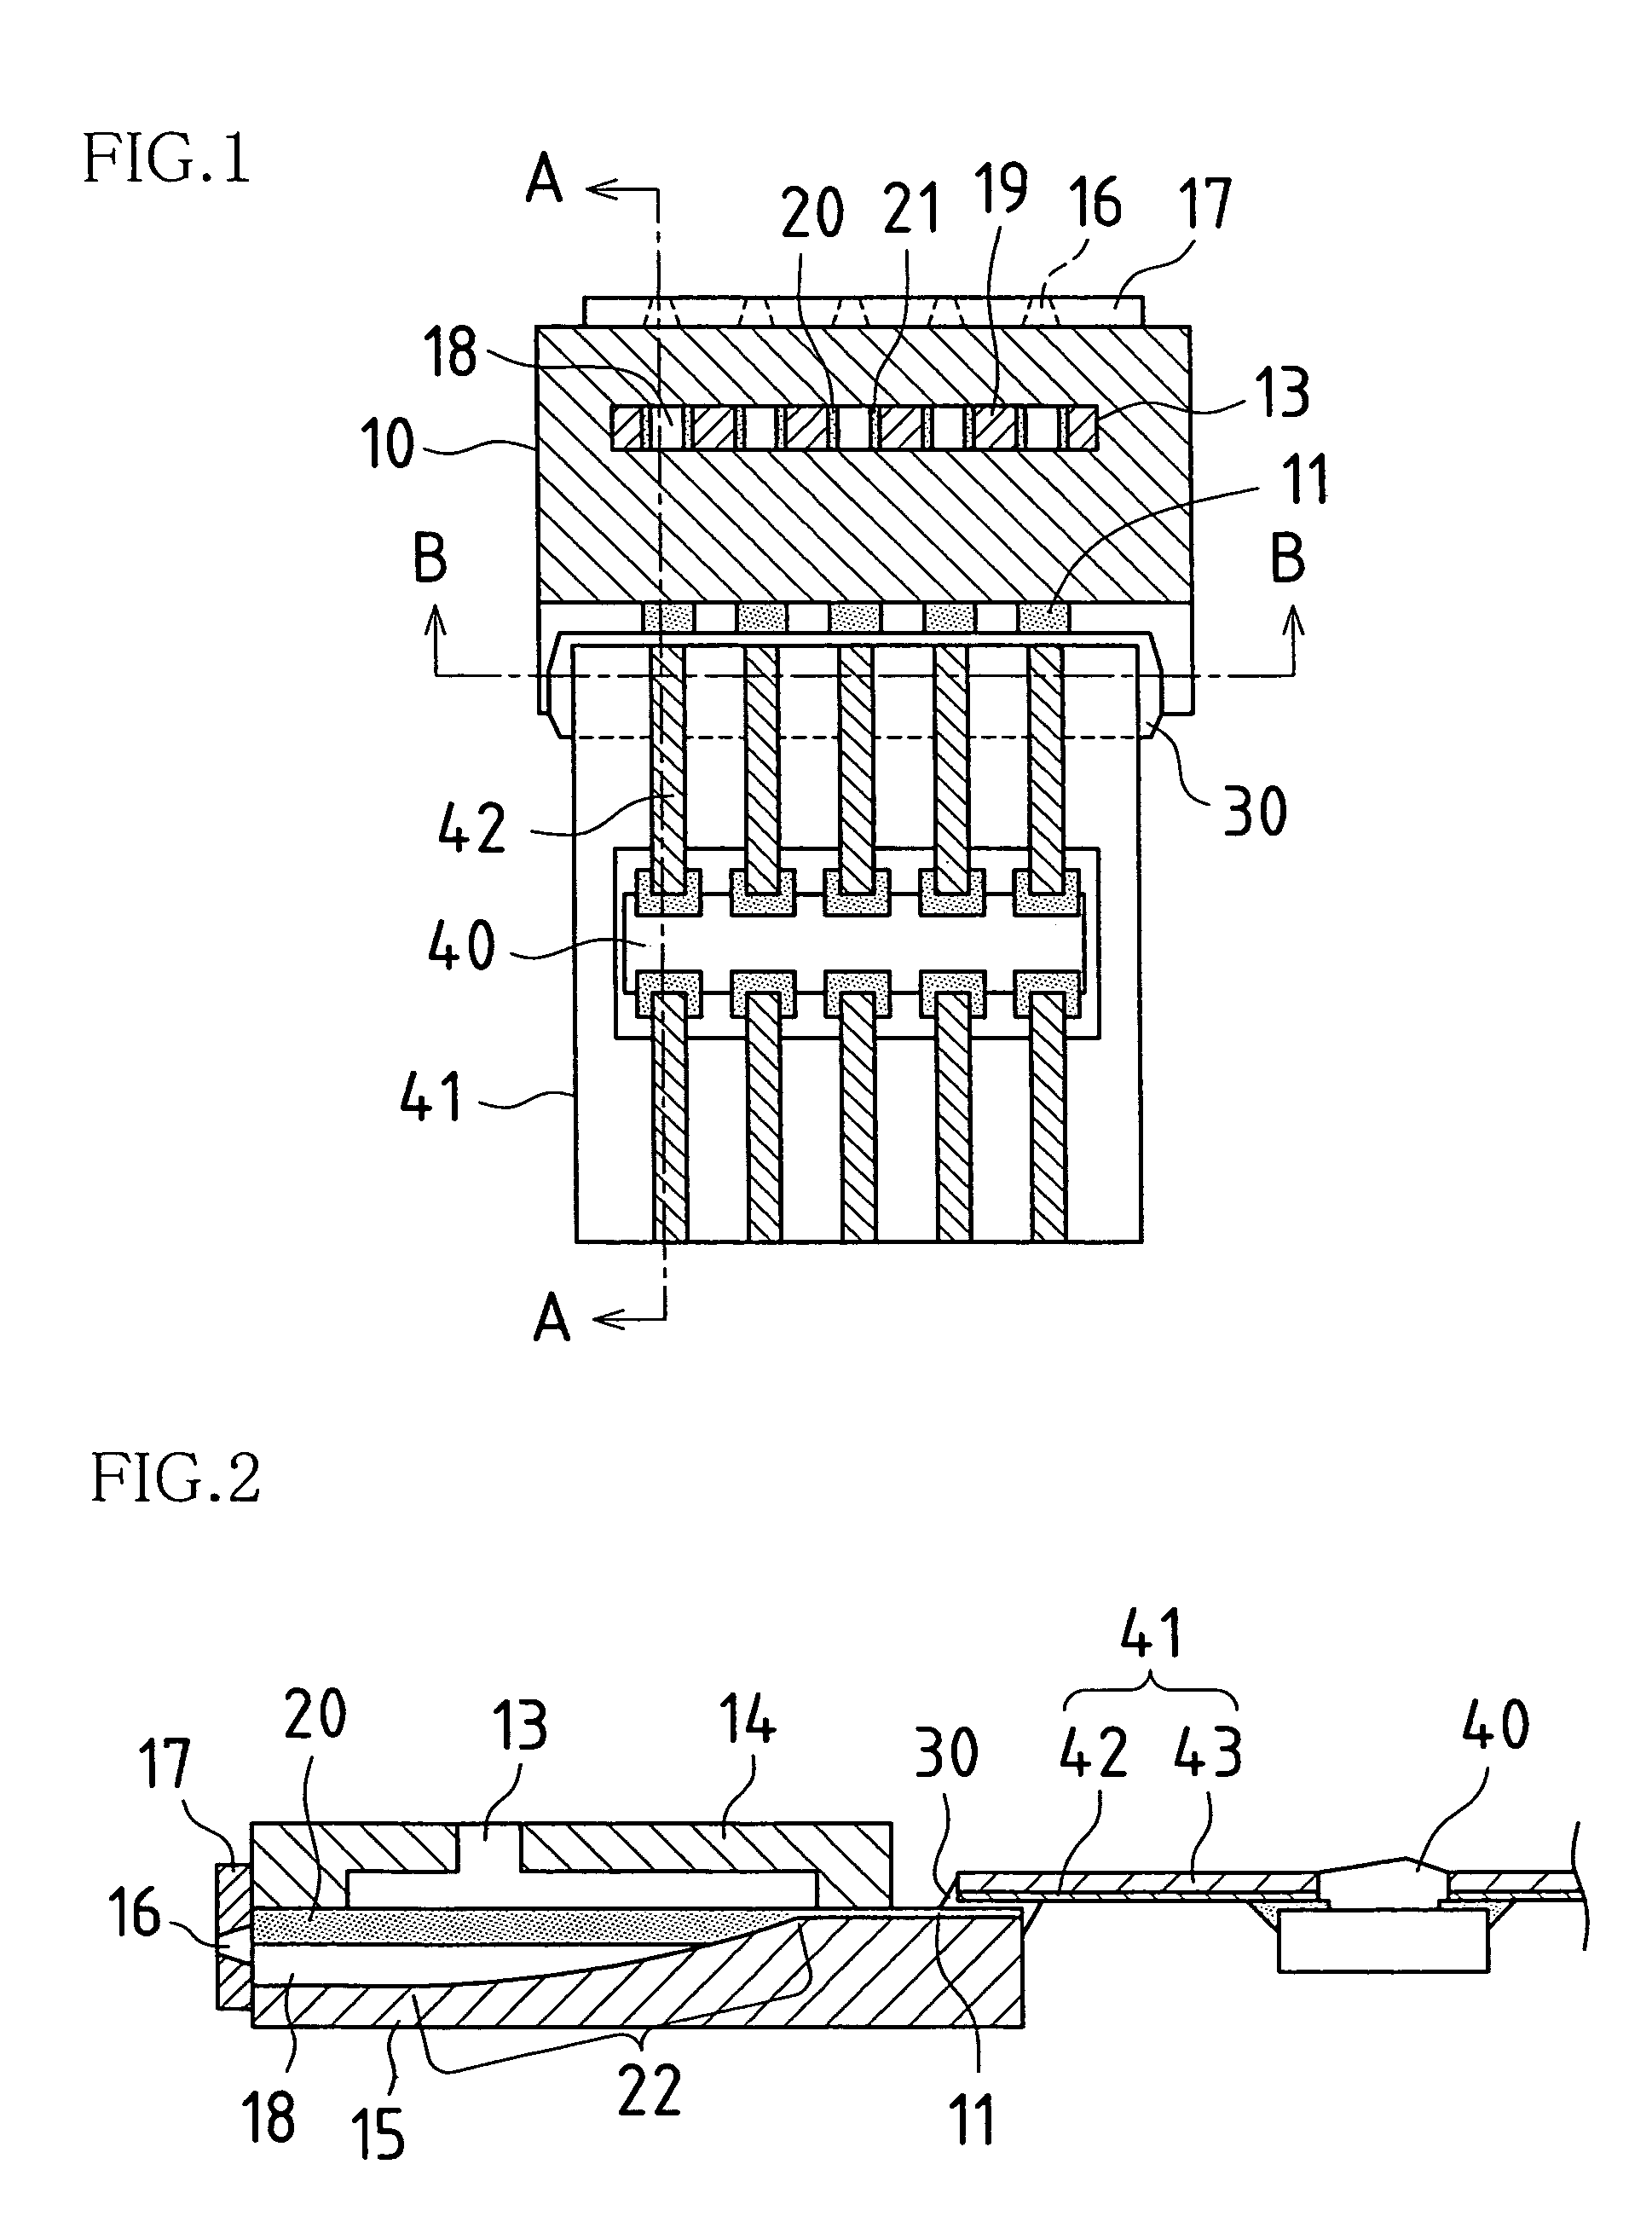 Circuit board electrode connection structure